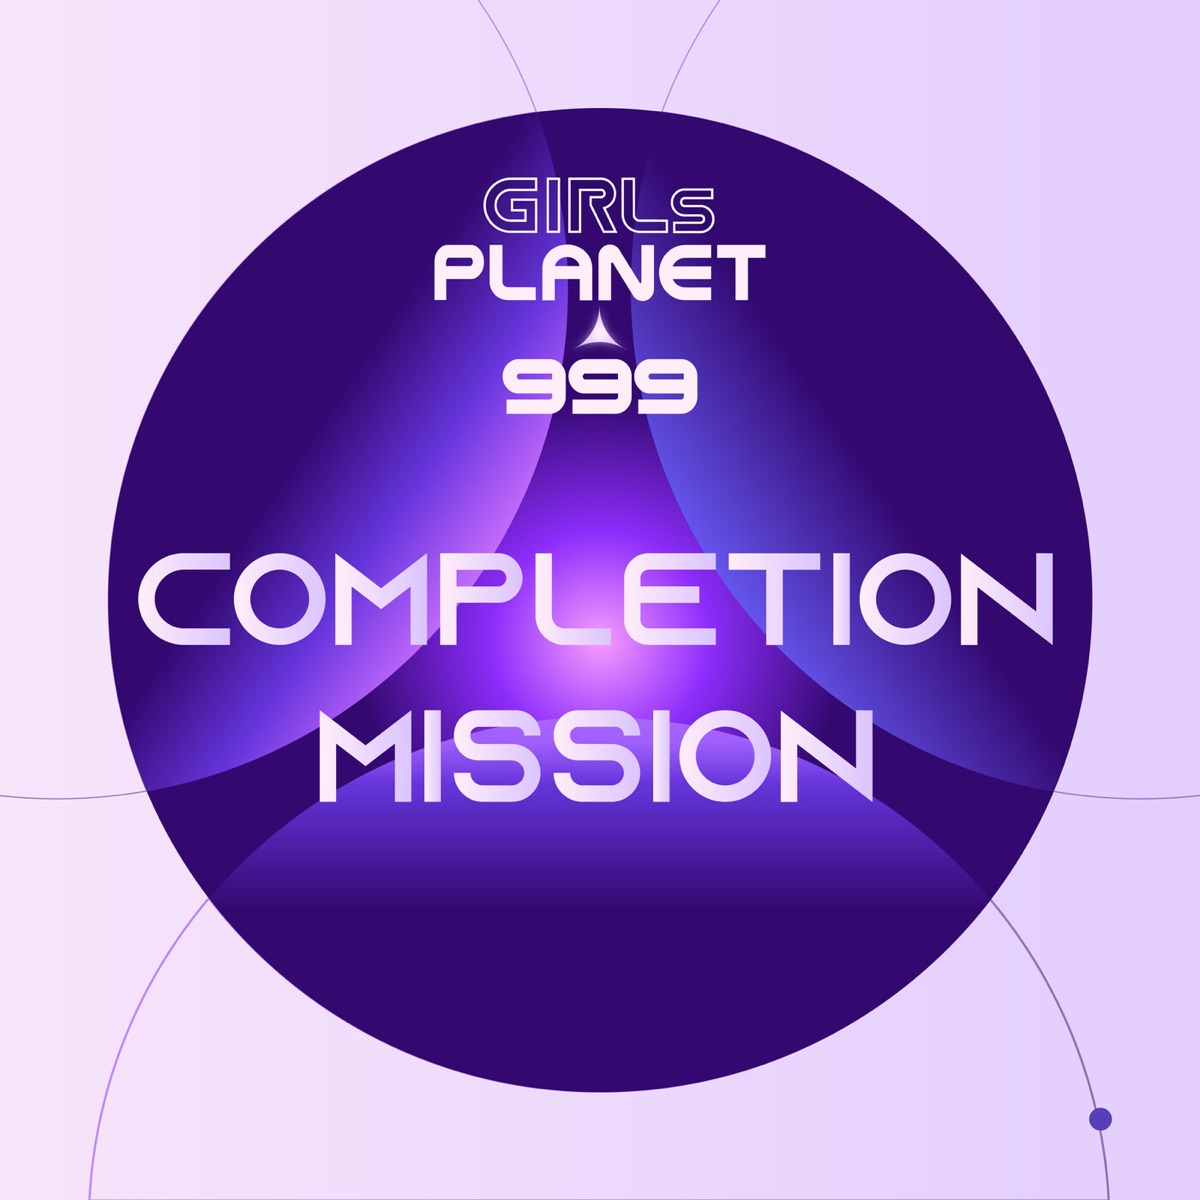 Cover for『Girls Planet 999 - Another Dream』from the release『Girls Planet 999 - Completion Mission』